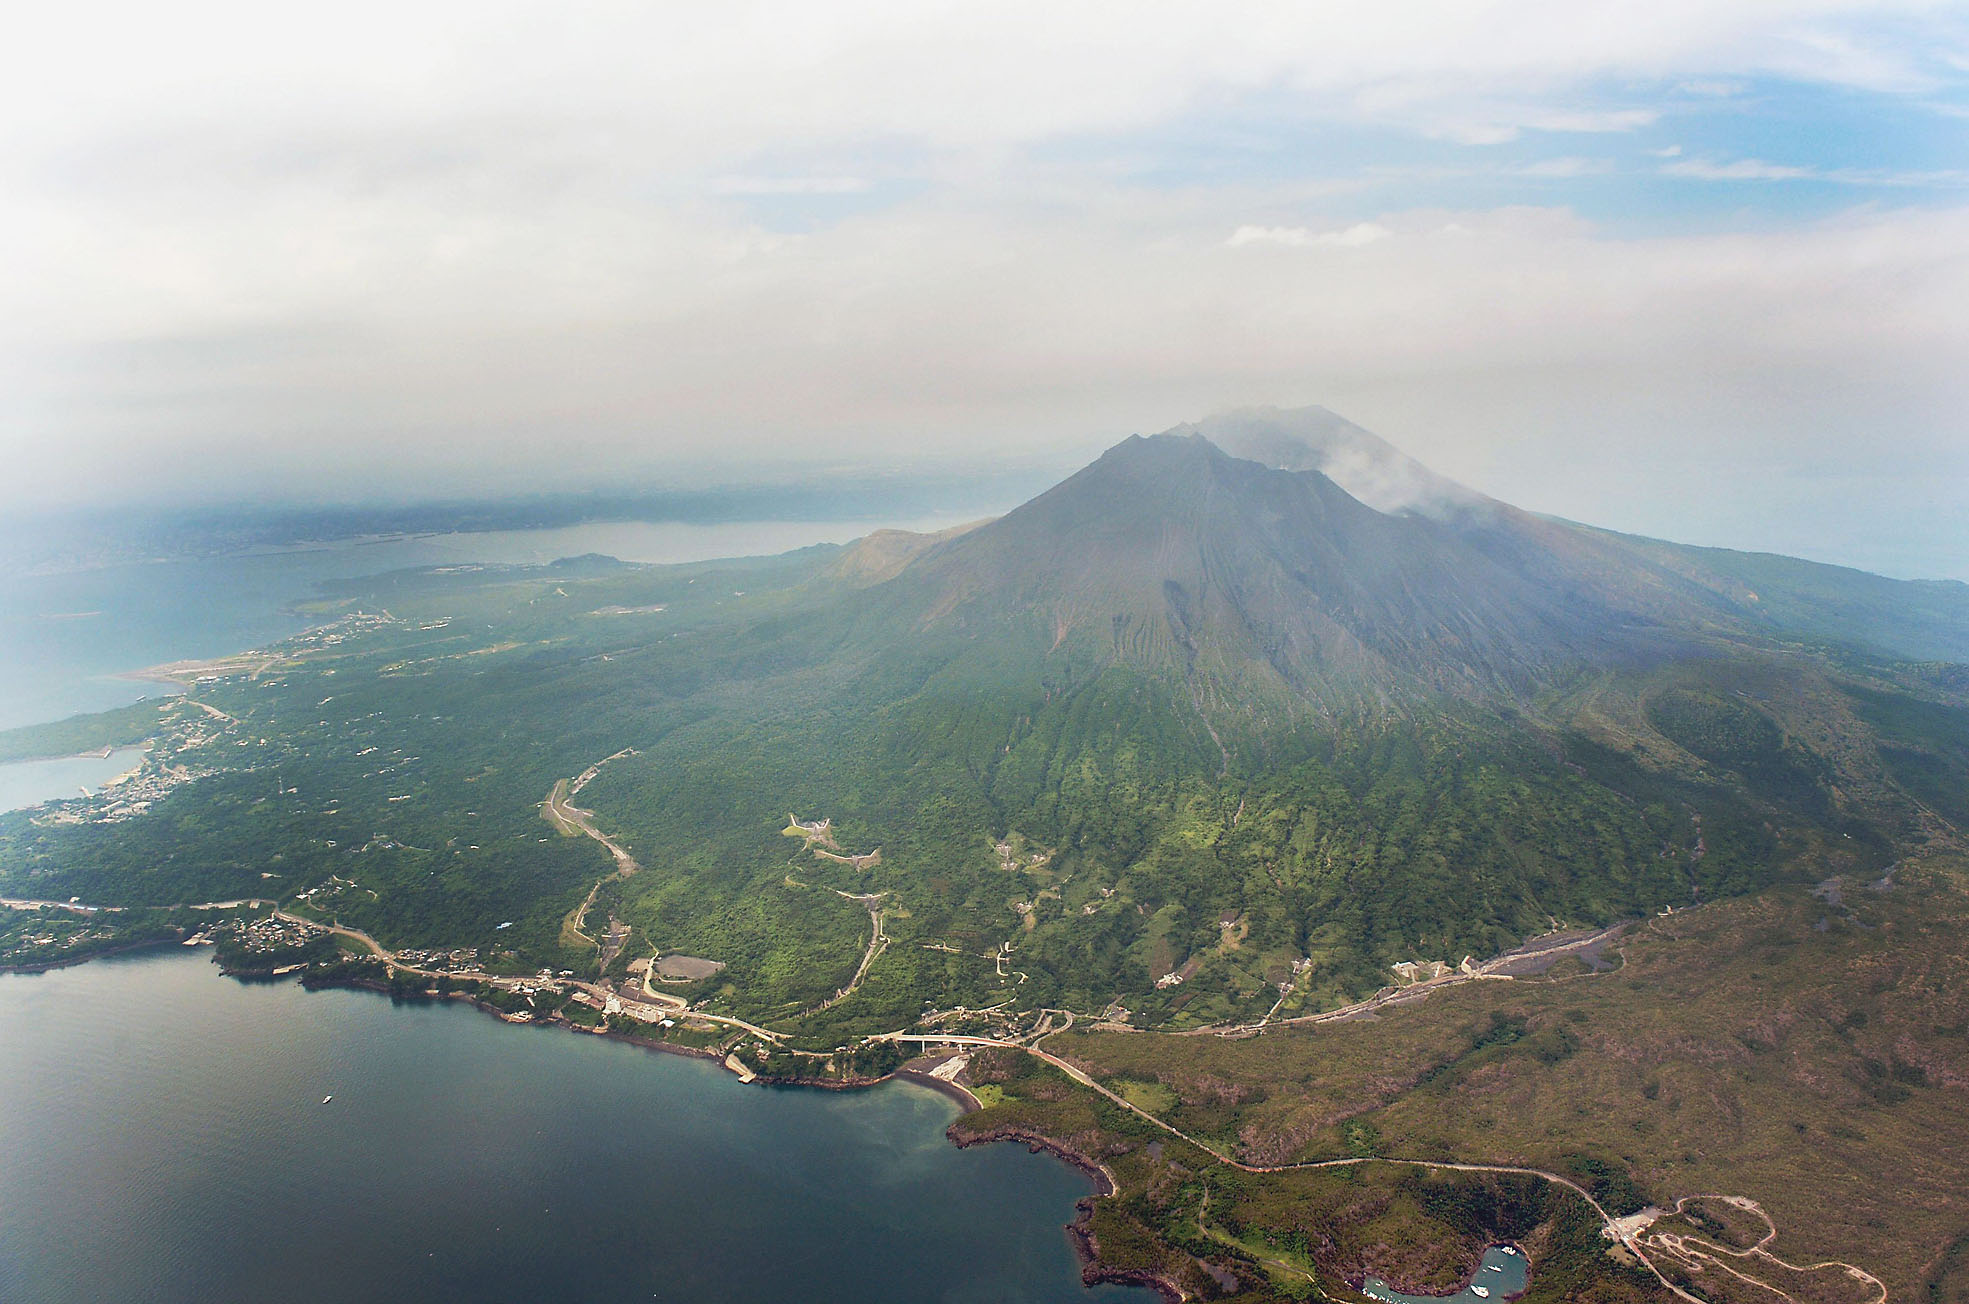 Mount Sakurajima, across the bay from the city of Kagoshima in Kagoshima Prefecture, is seen Saturday. The same day, the Meteorological Agency raised the alert level to 4 and urged nearby residents to be prepared to evacuate as the volcano is showing signs of increased activity. | KYODO